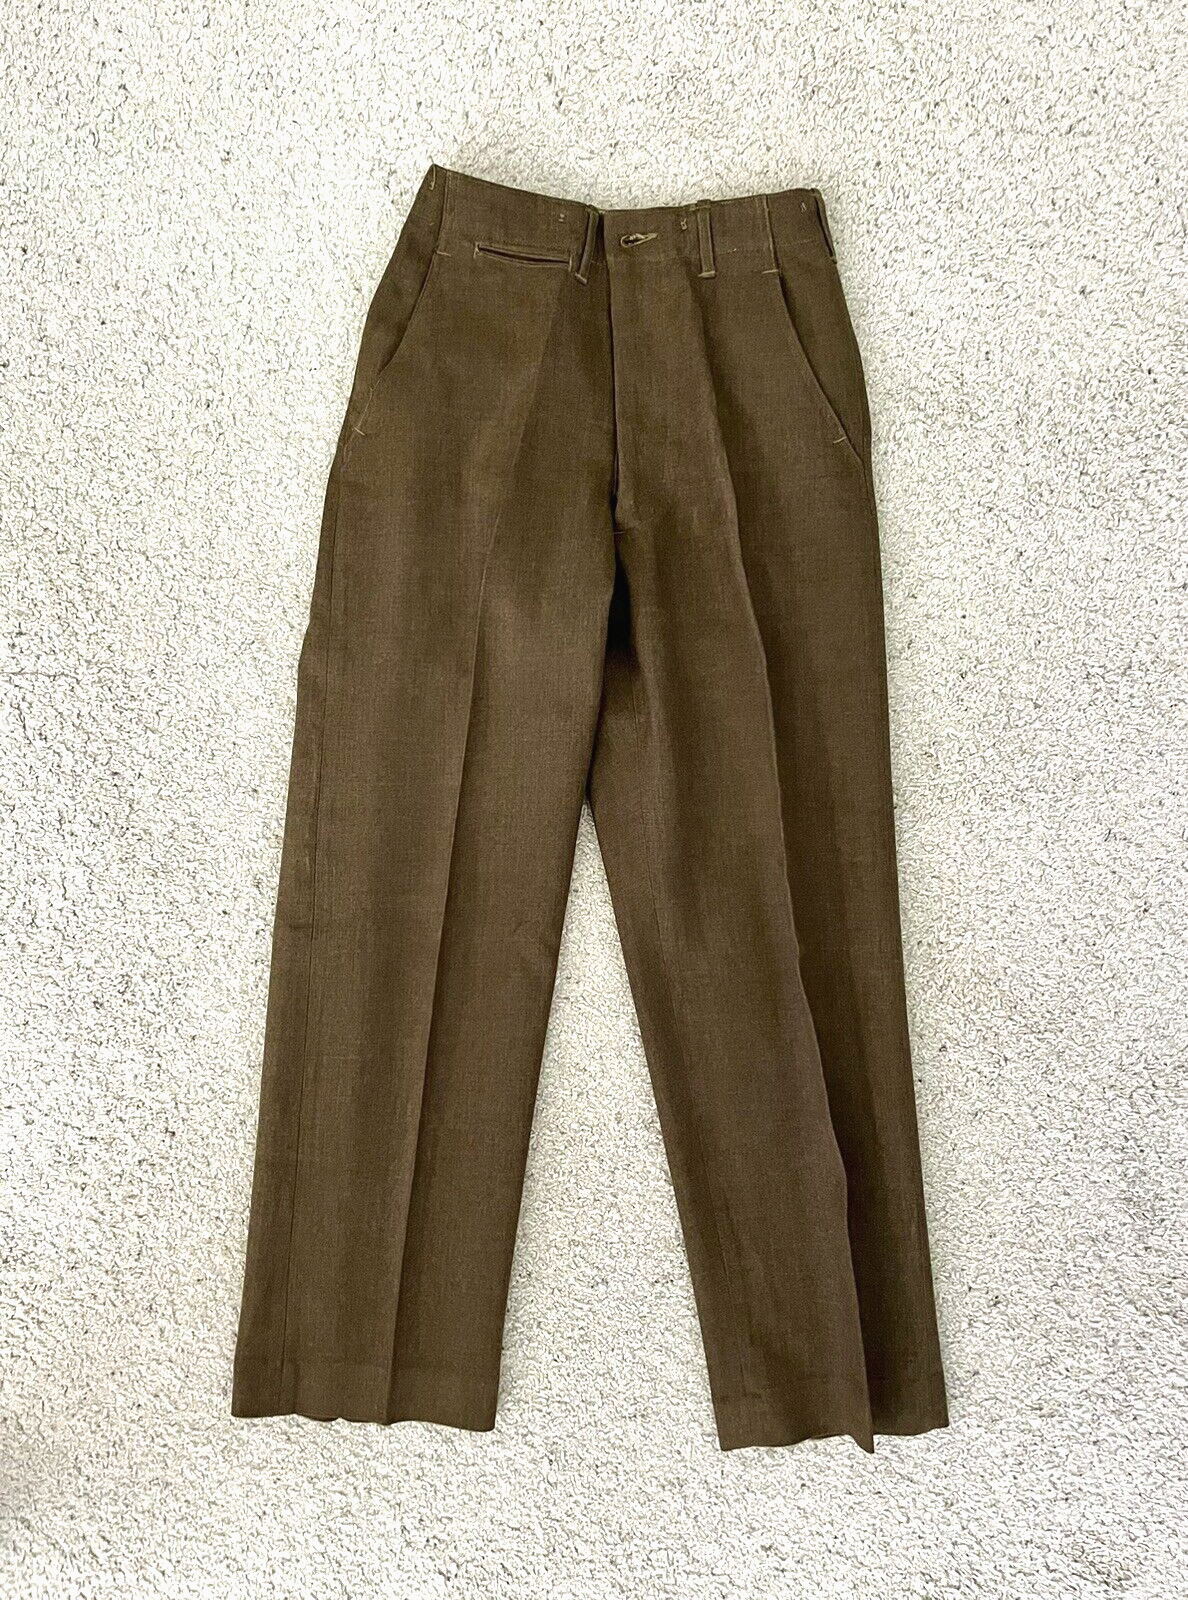 WW2 US Army Button Fly Wool Pants/Trousers 28 x 31 Beautiful Condition